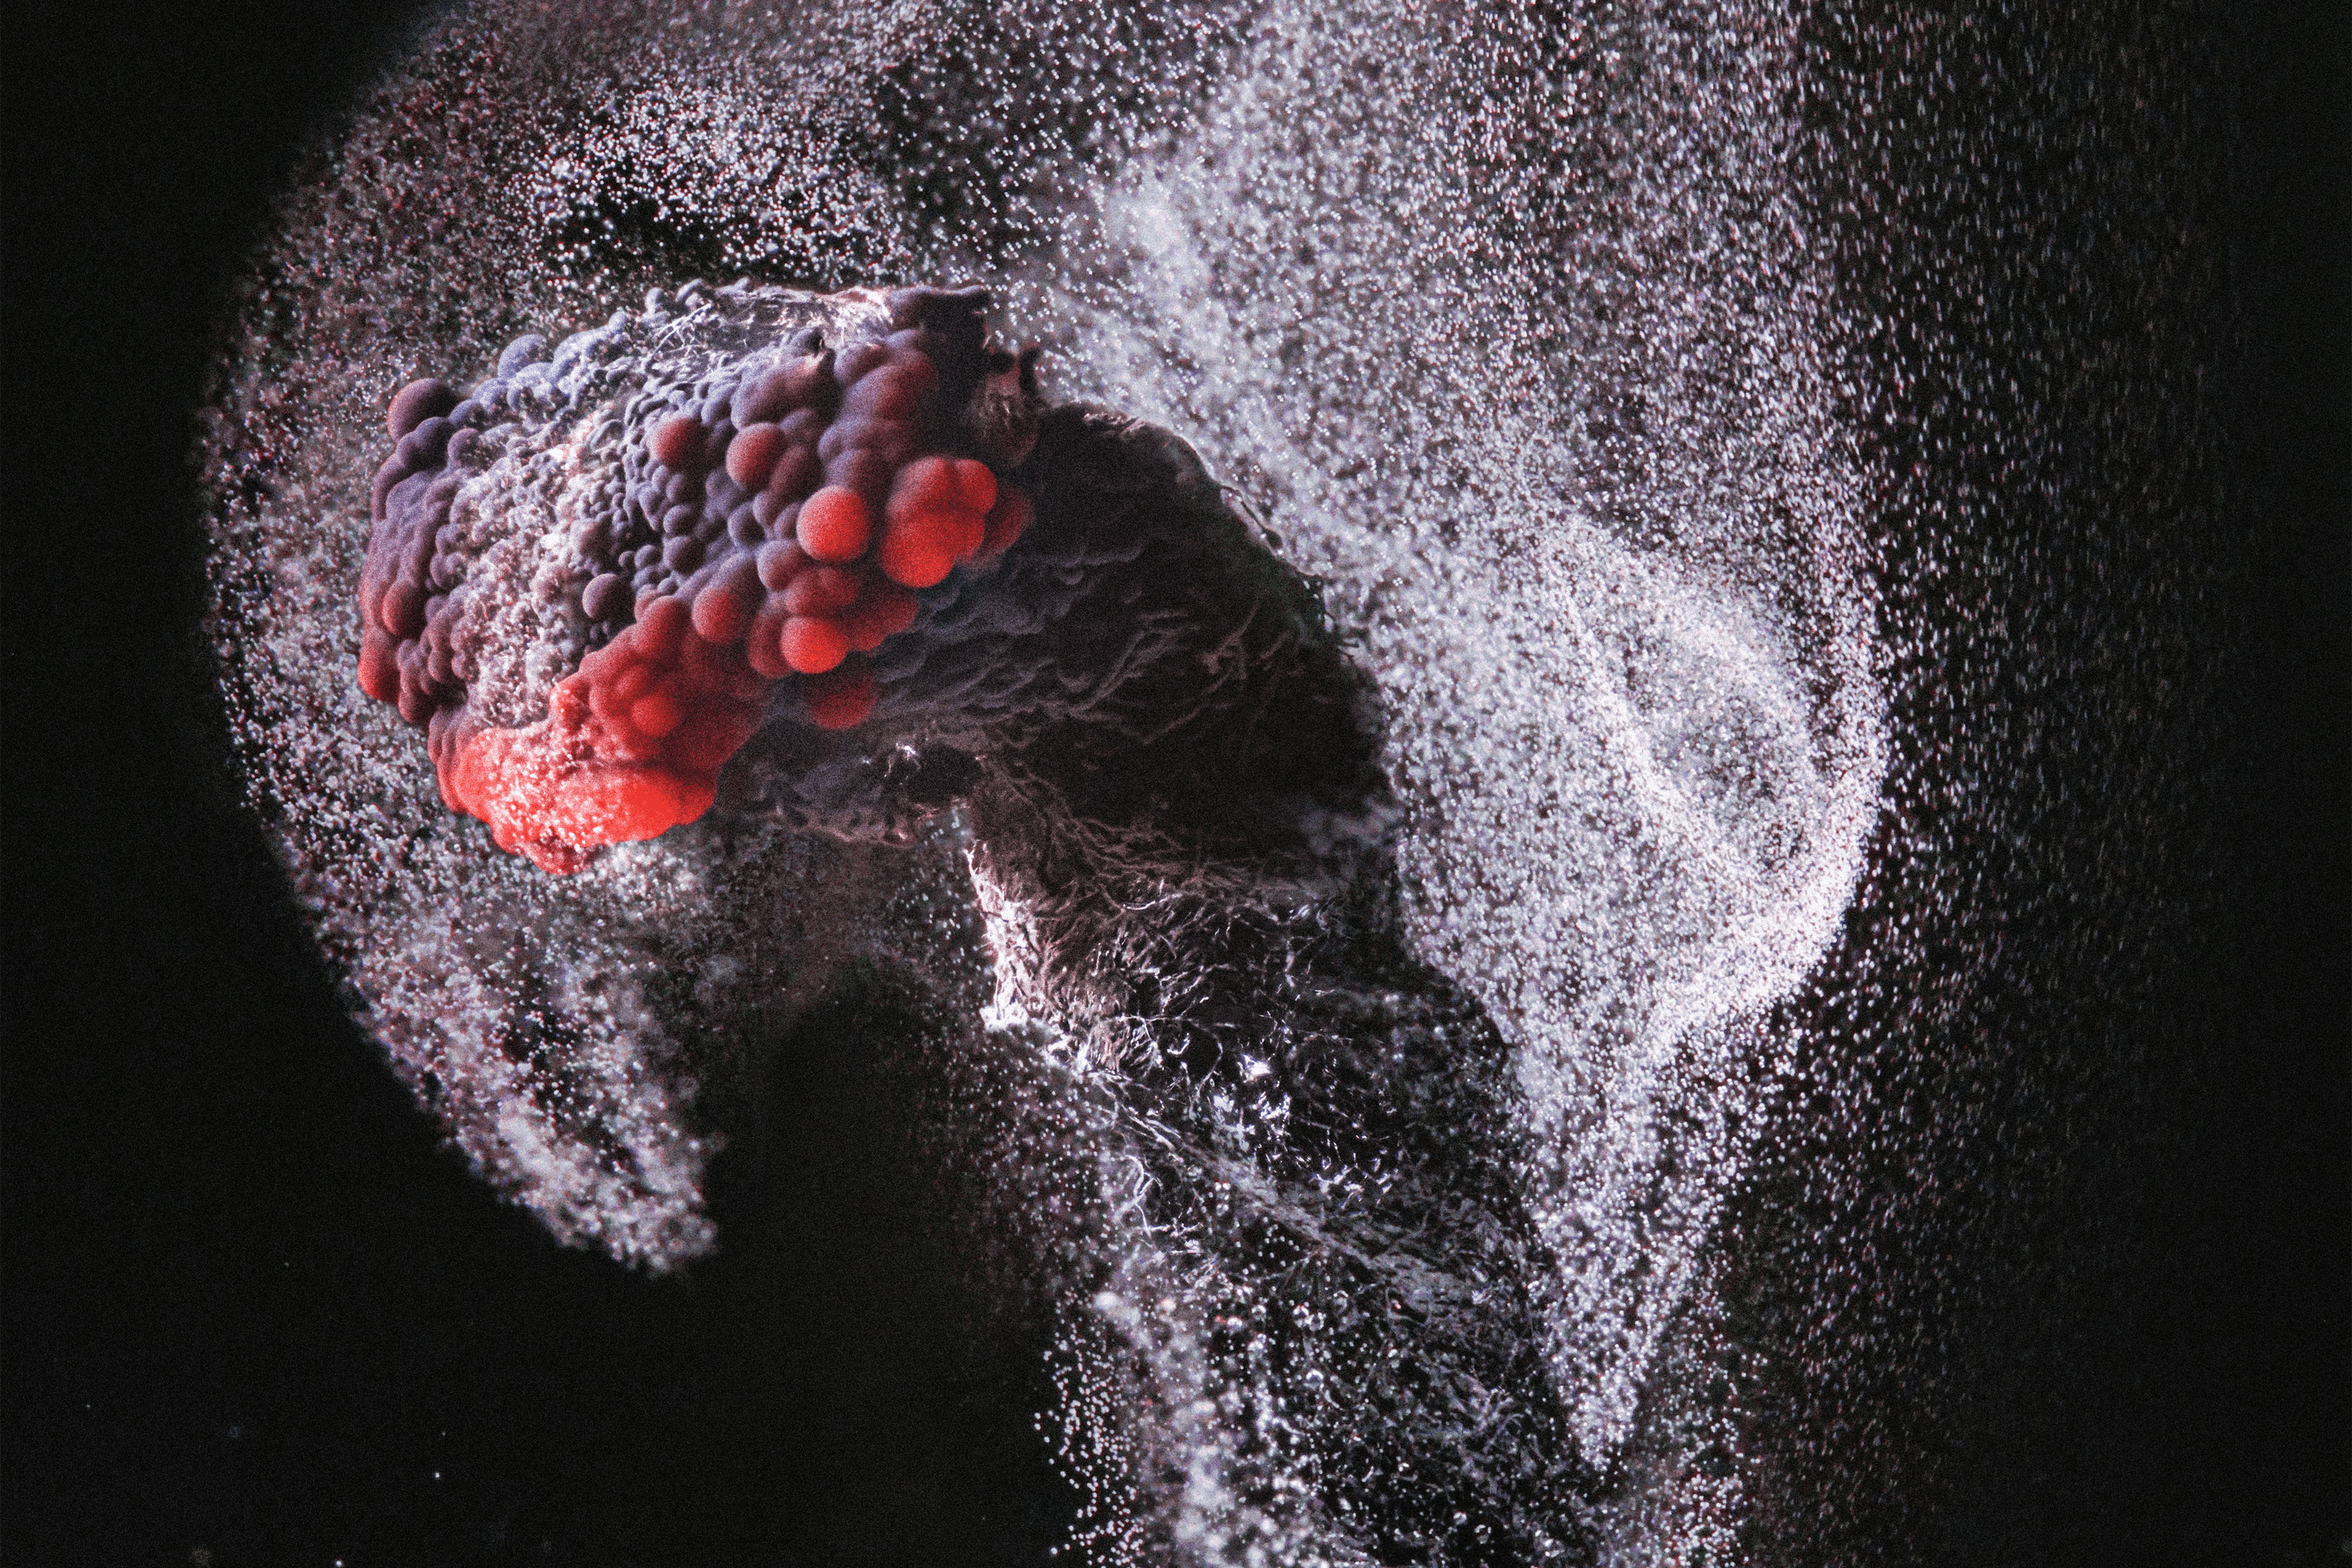 The extinguished wick of a candle showing particles of carbon being released at 2.5x magnification.